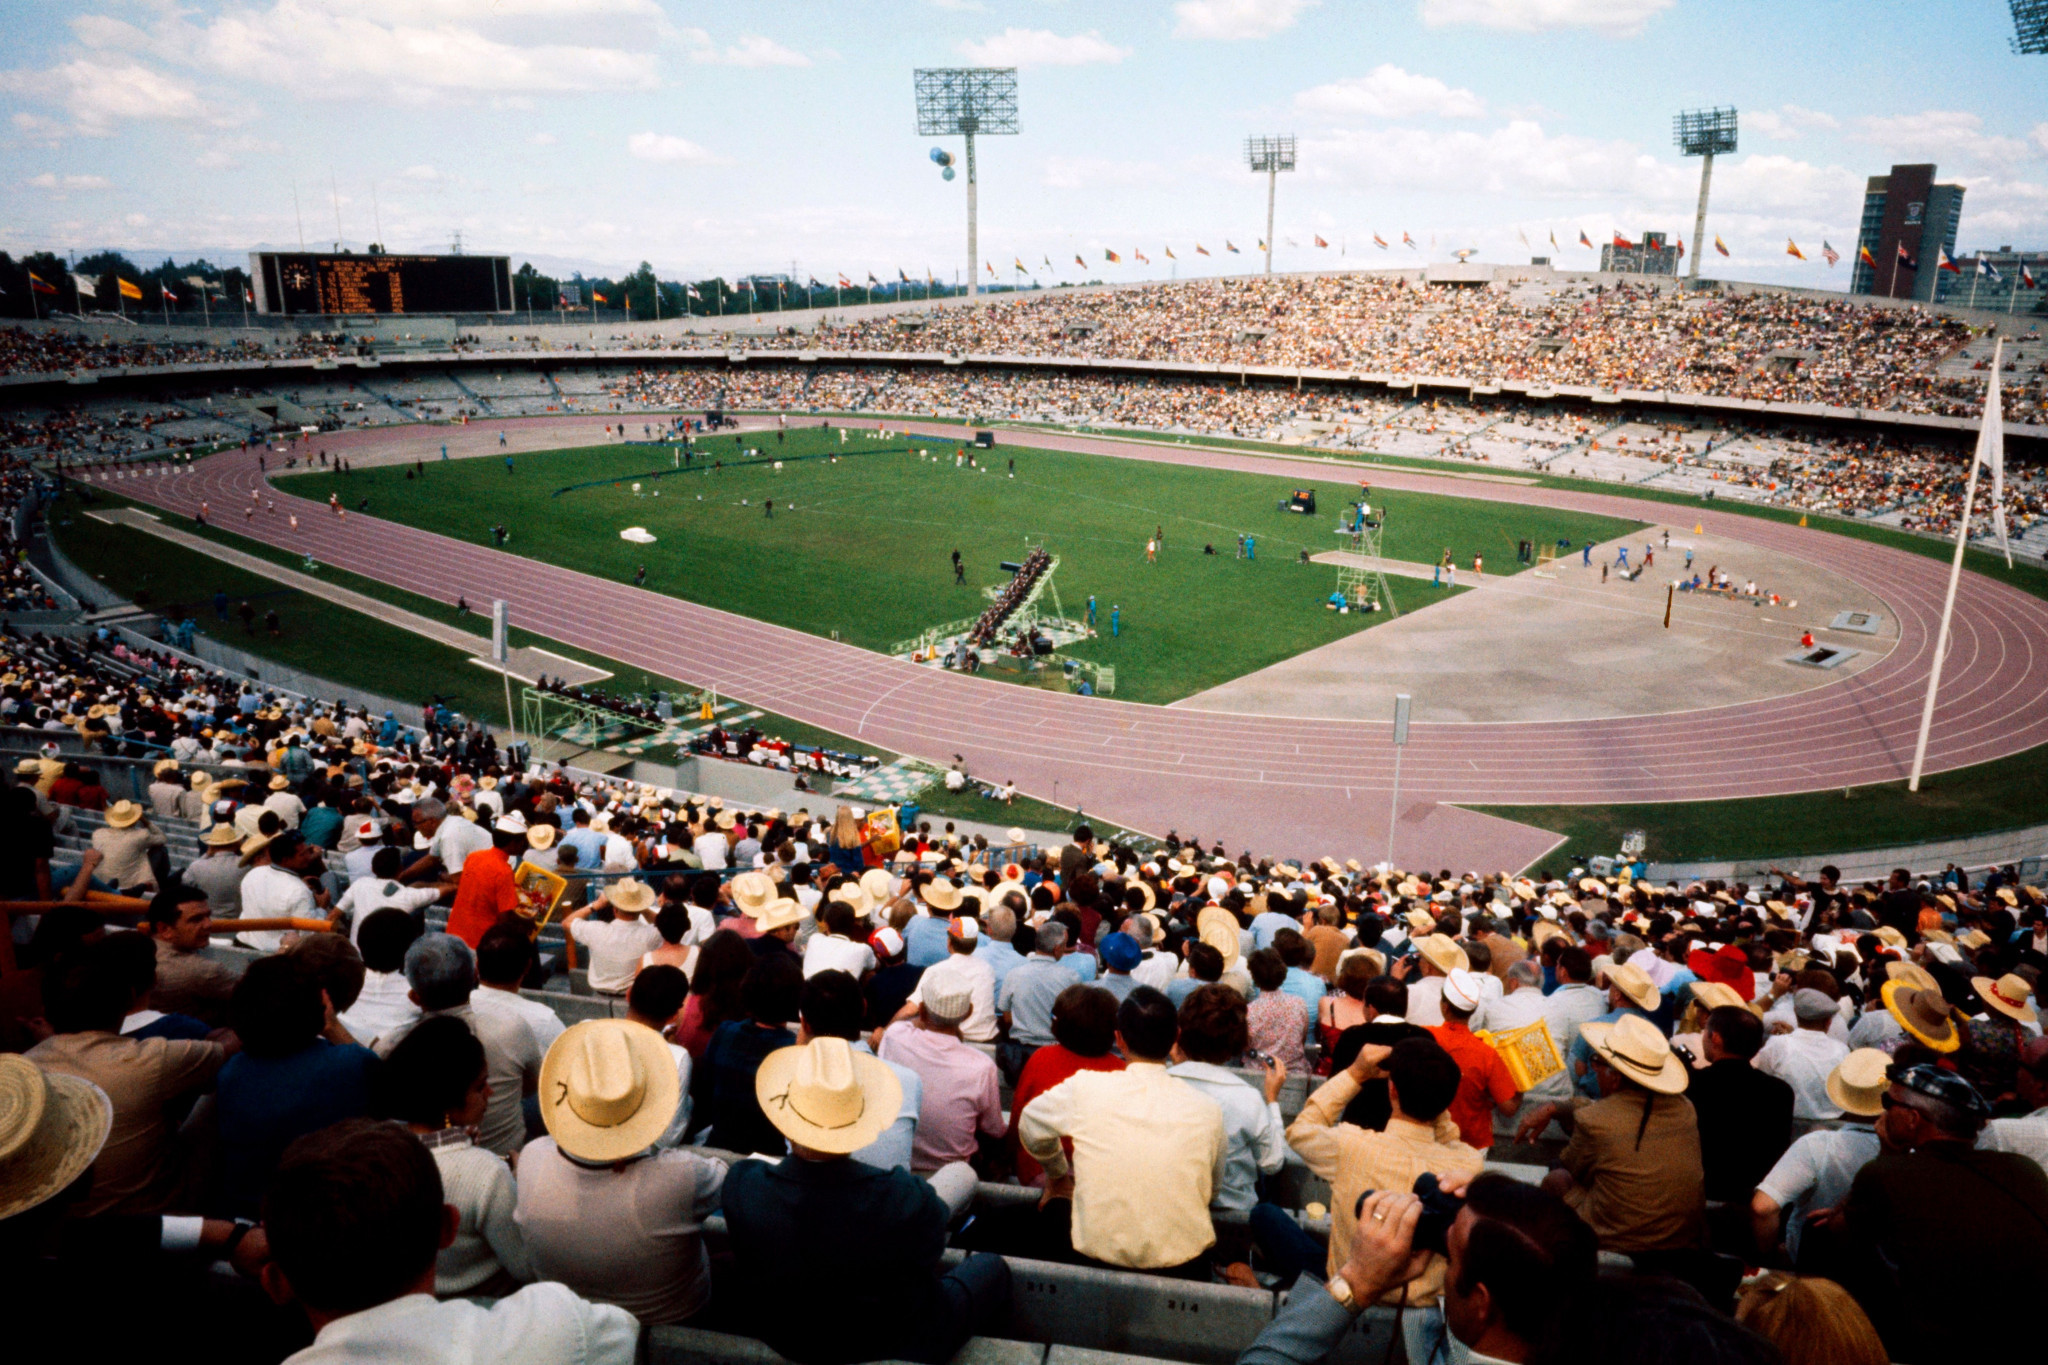 Heat was also an issue at the 1968 Olympic Games in Mexico ©Getty Images